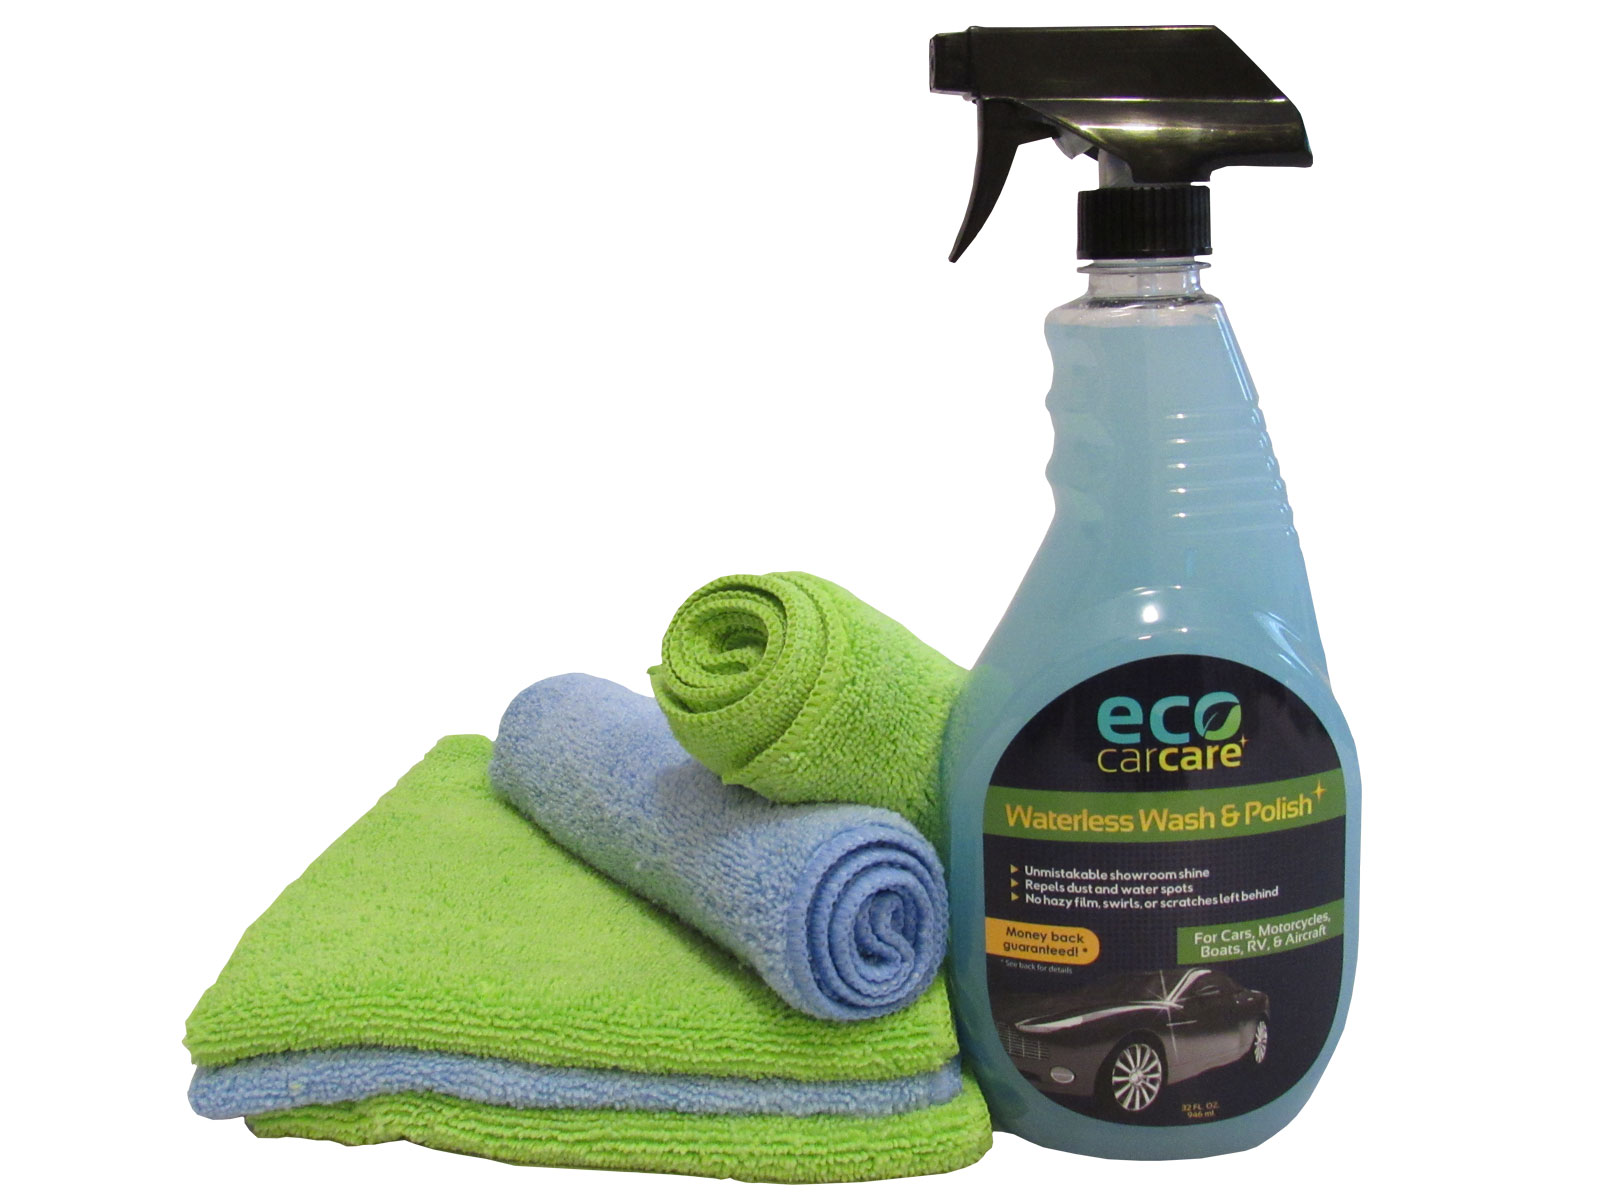 waterless car wash and polish with micro fiber towels